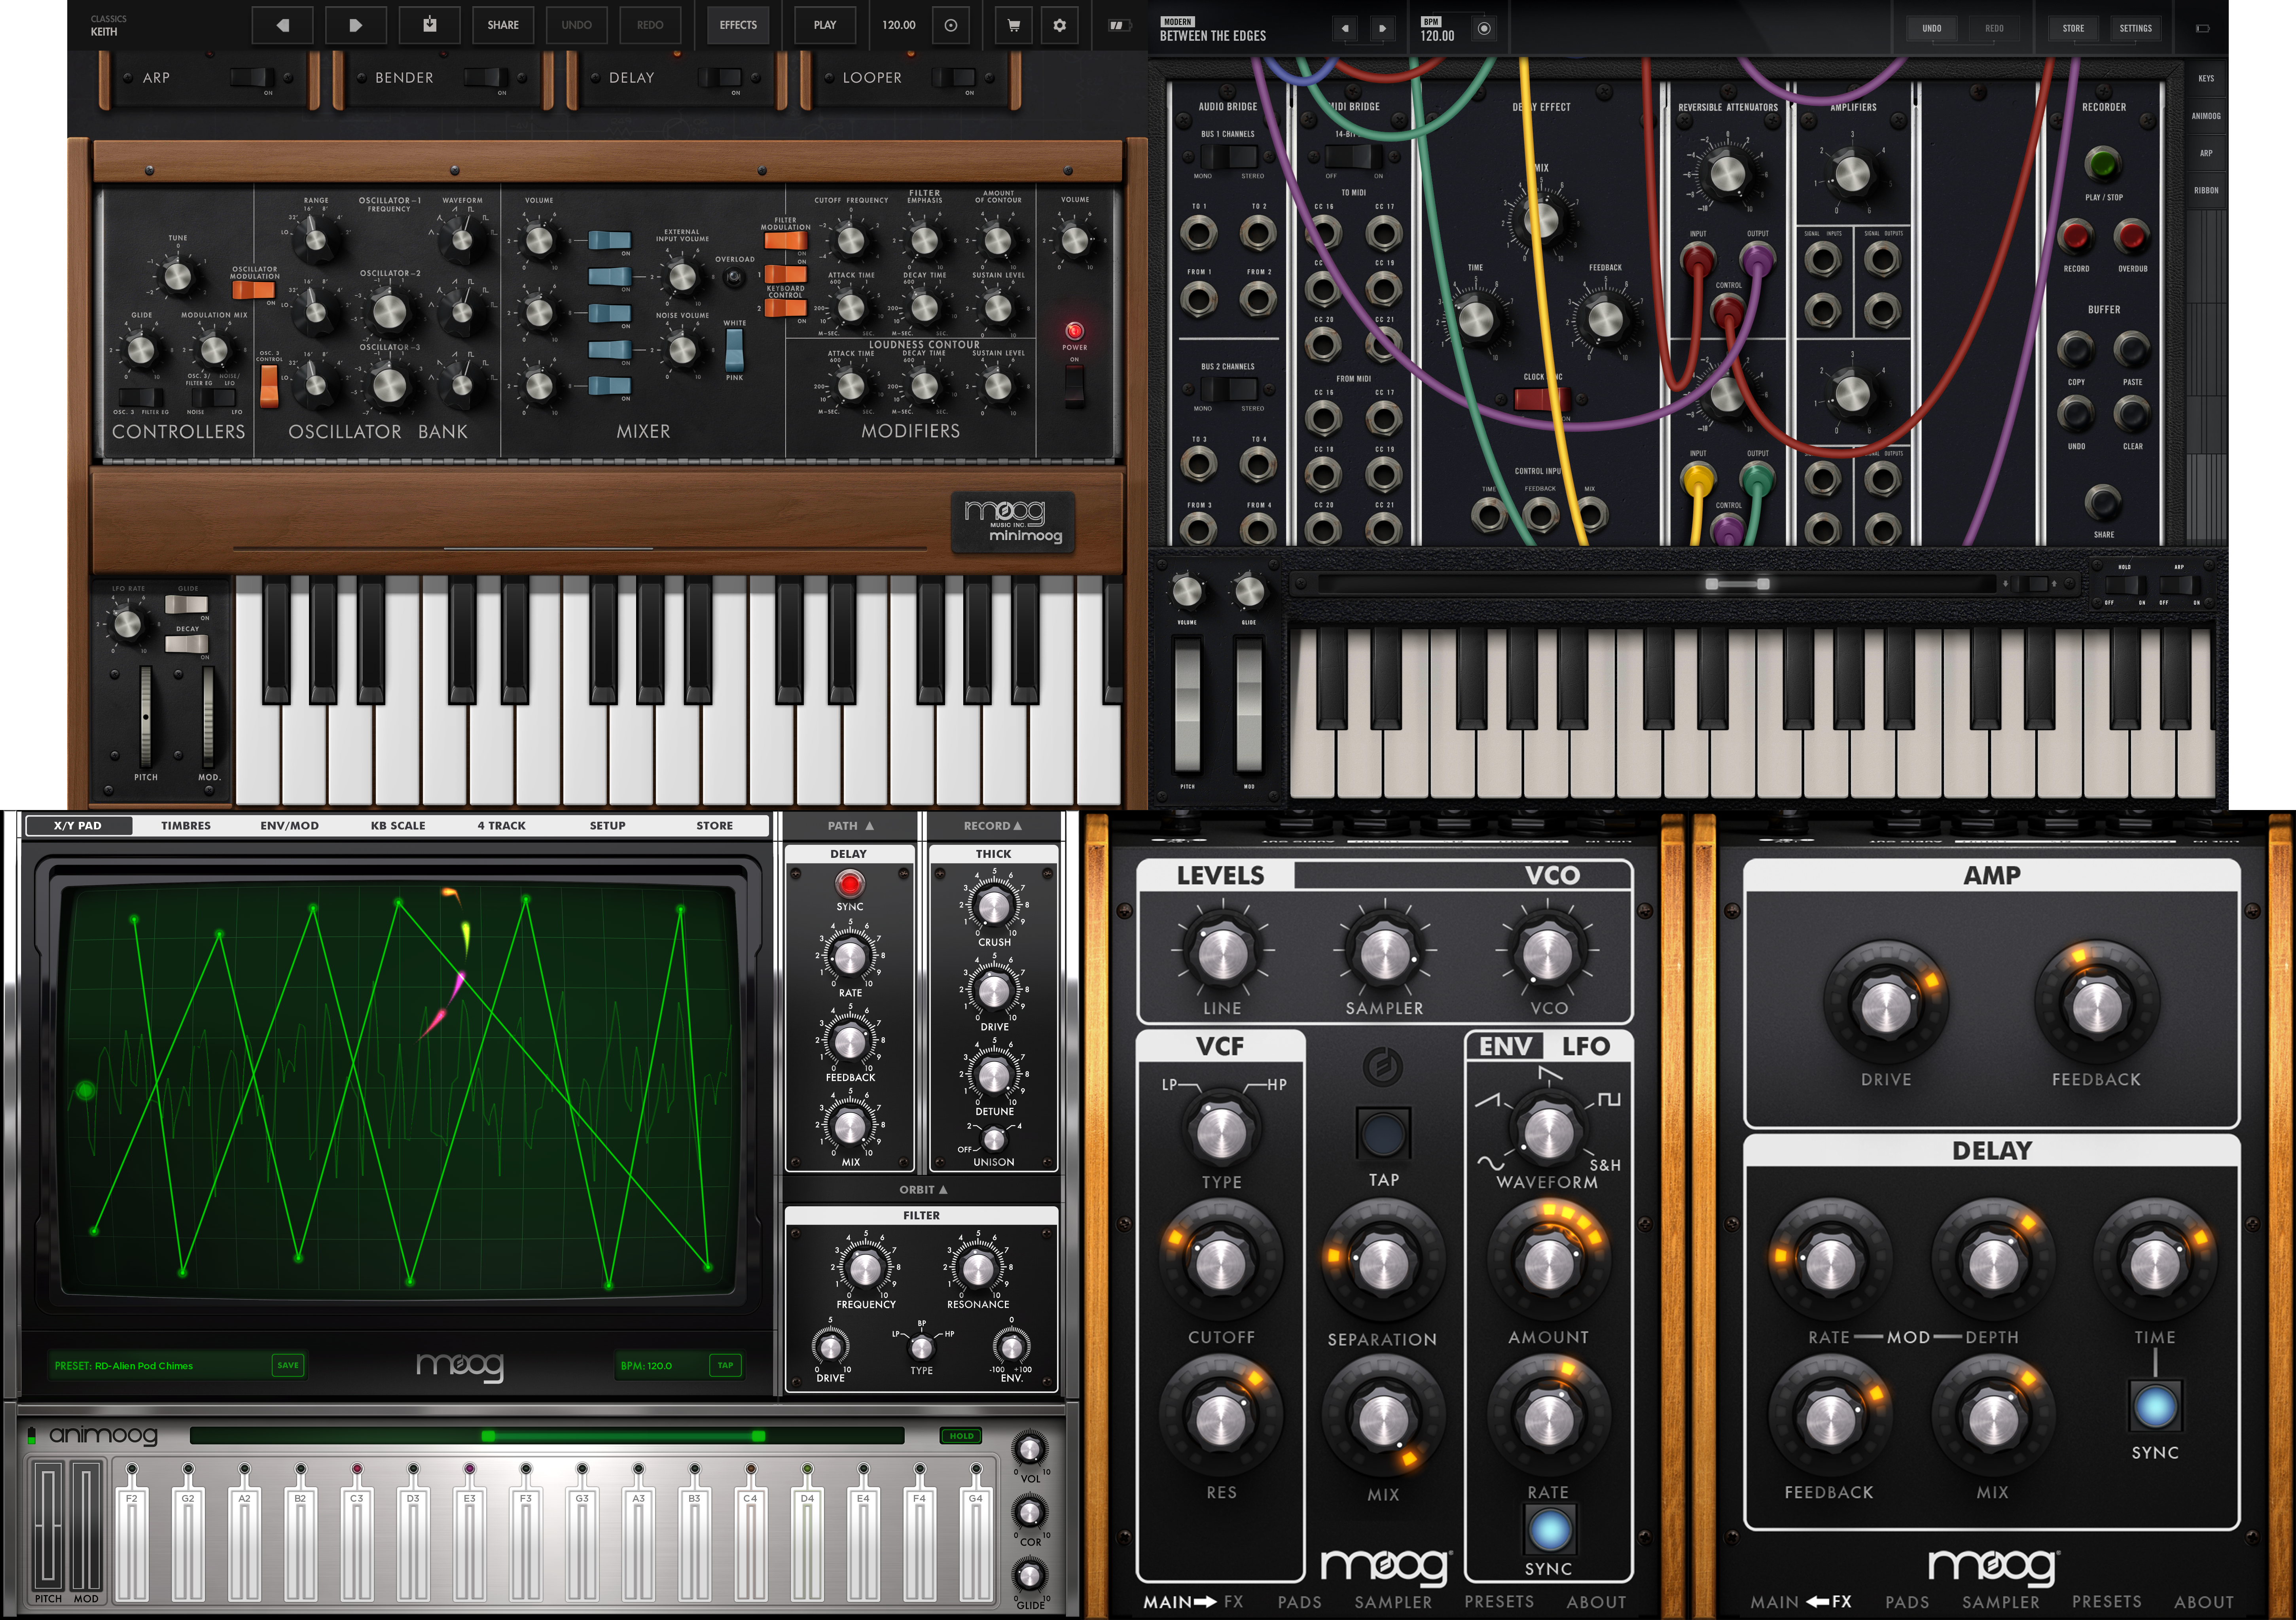 All Moog synthesizer apps on iPhone and iPad are currently free